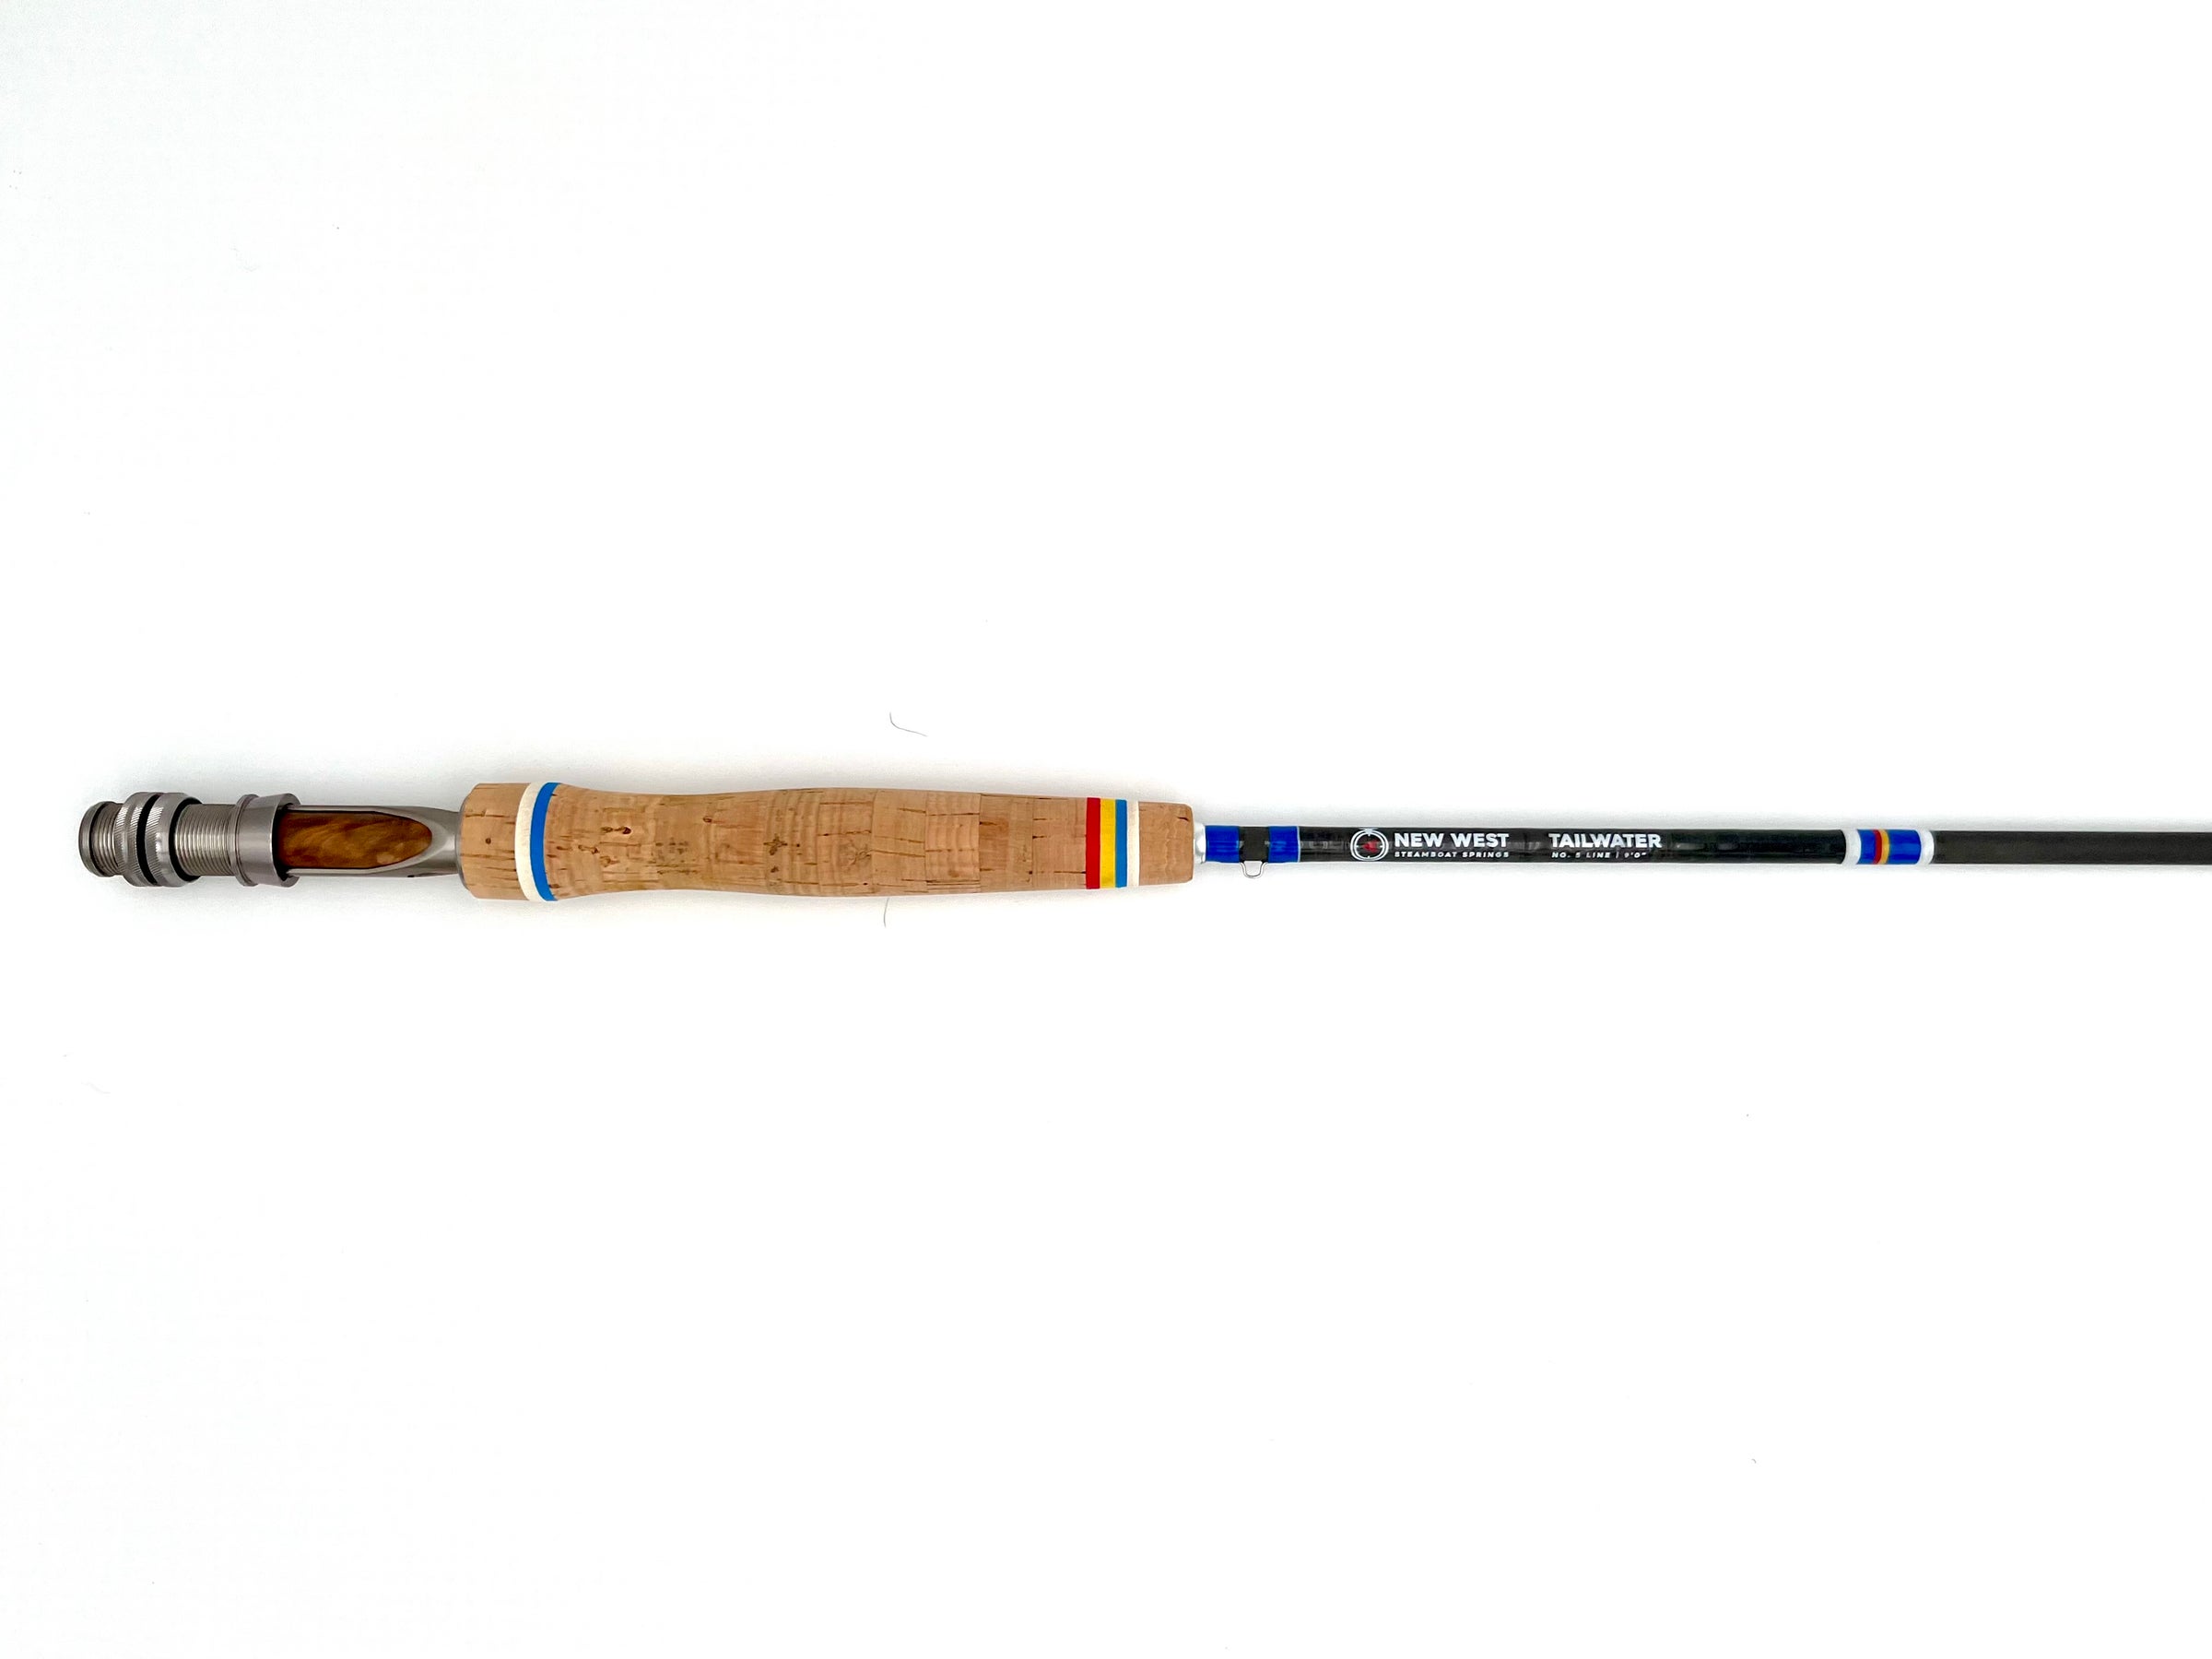 New-fishing-rod, Fishing Rods for Sale